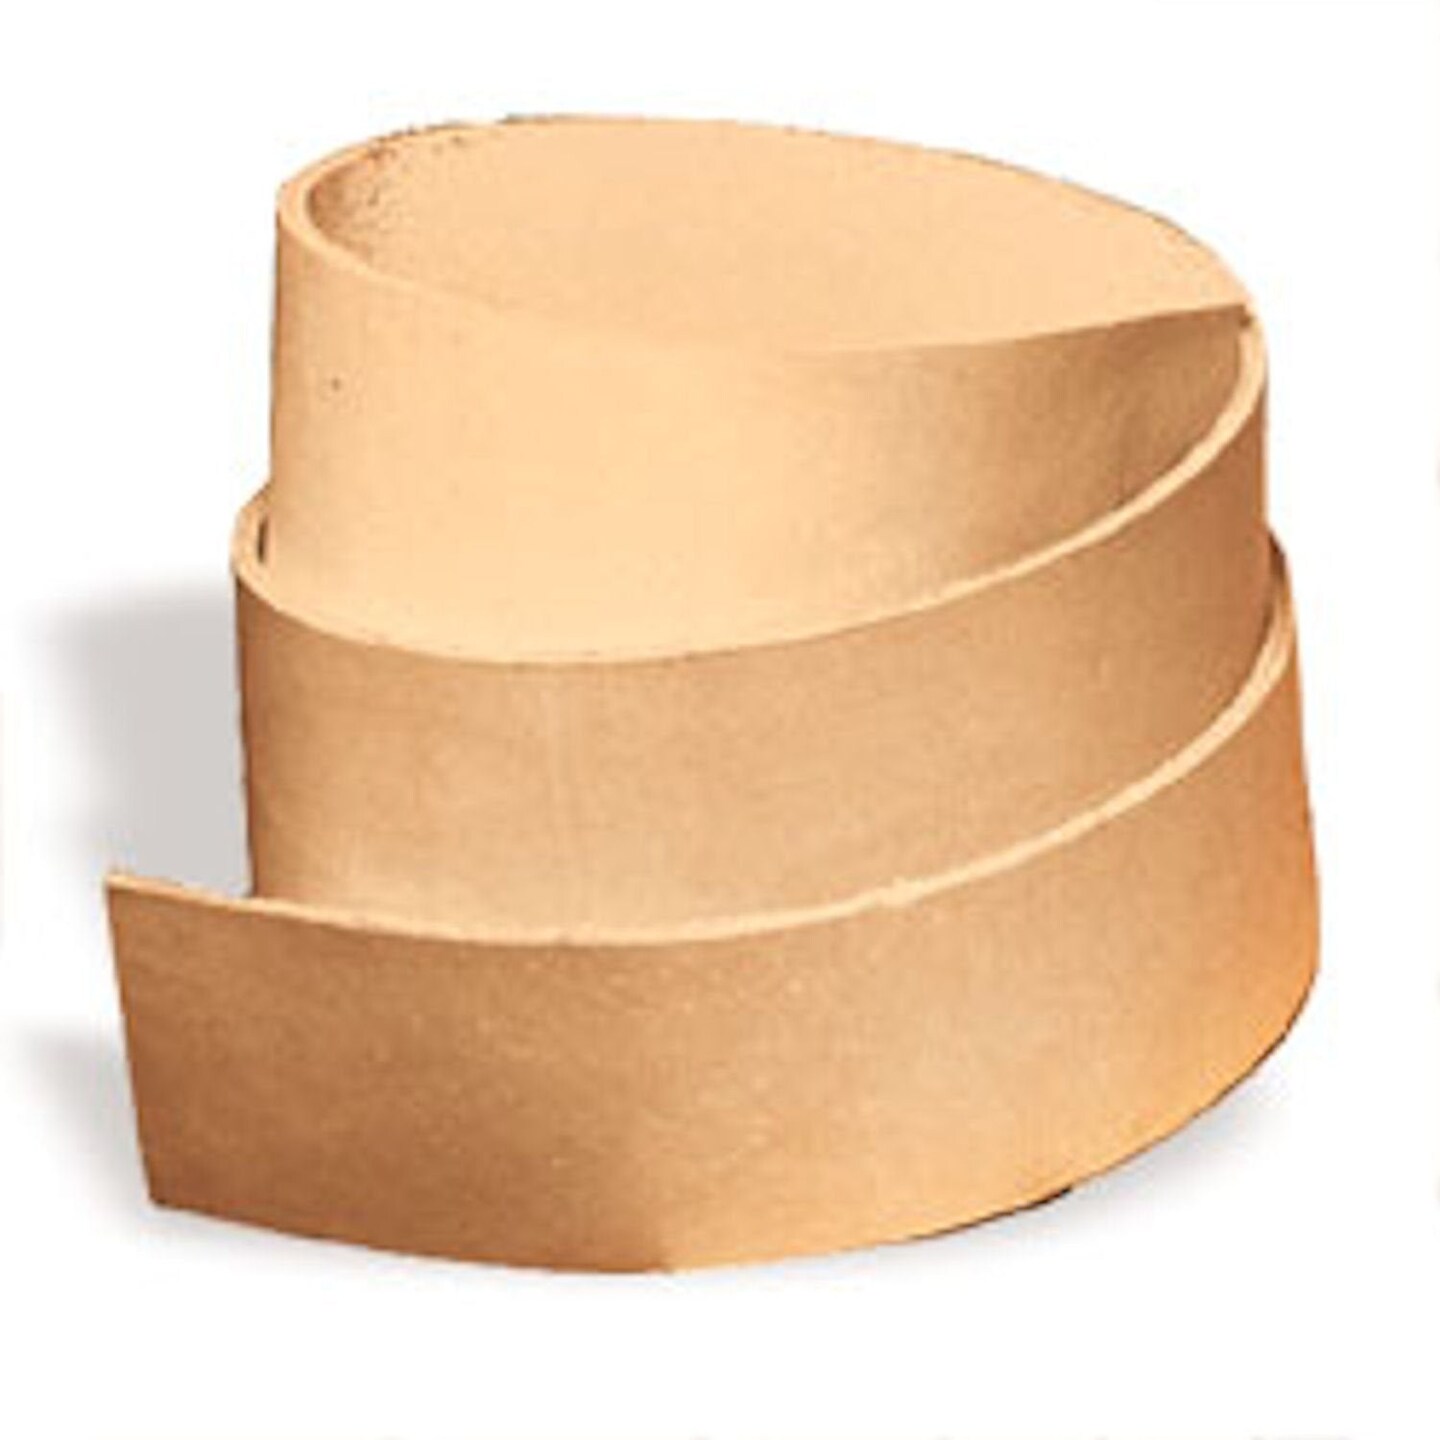 Tandy Leather Heavyweight Natural Cowhide Leather Strip 3/4 (19 mm) x 50 (1.3 m) 4523-00